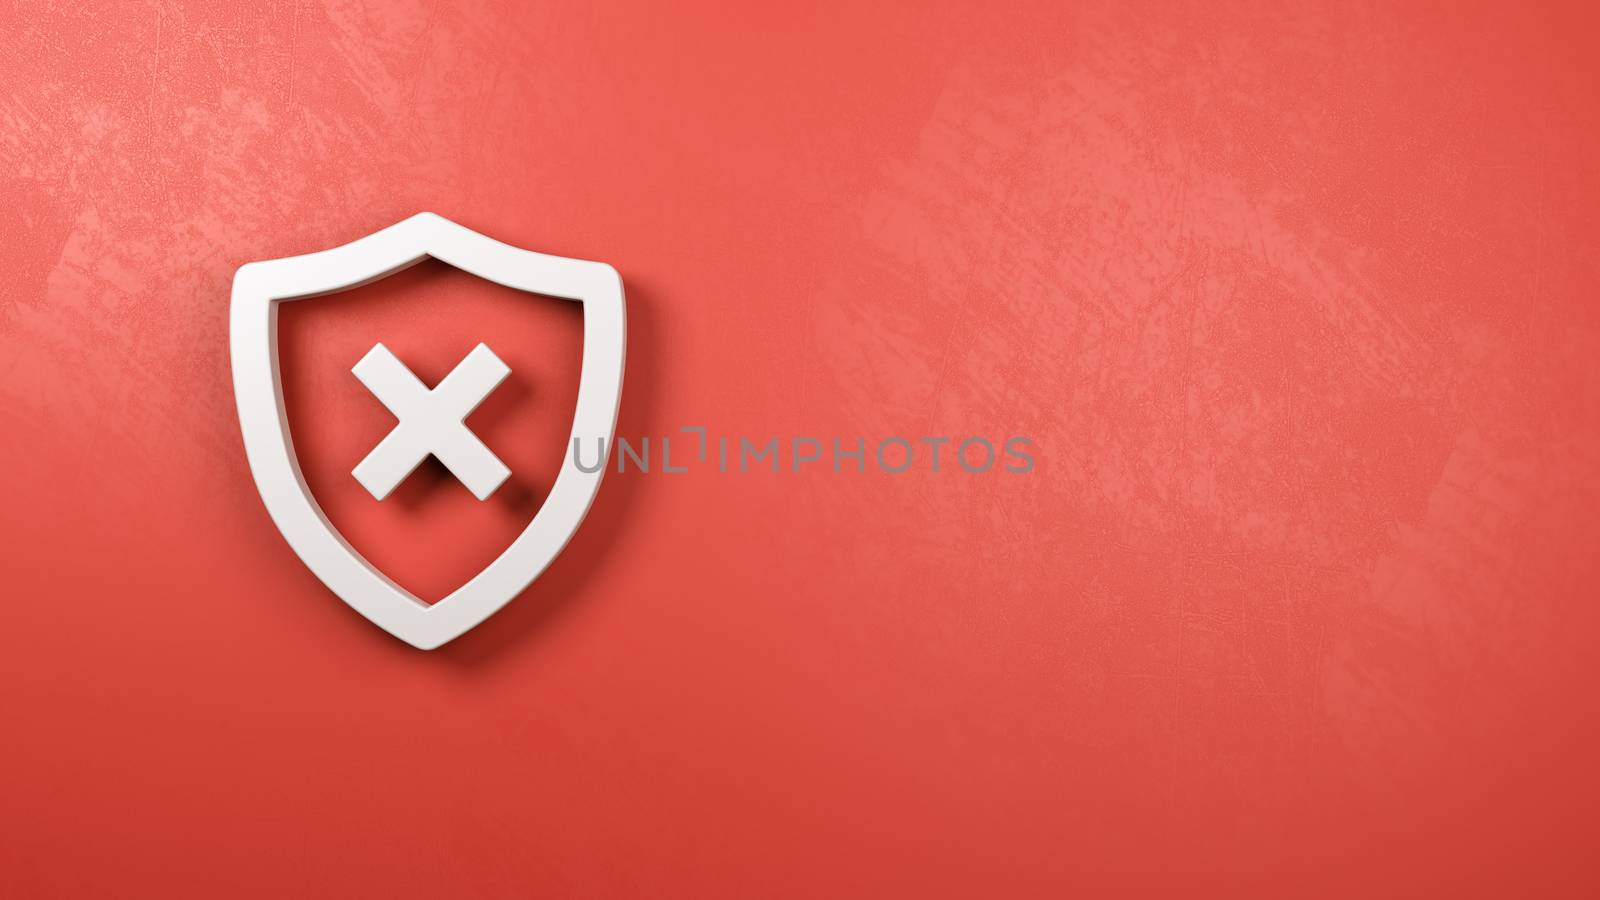 White Shield 3D Symbol Shape with Cross on a Red Plastered Wall with Copy Space 3D Illustration